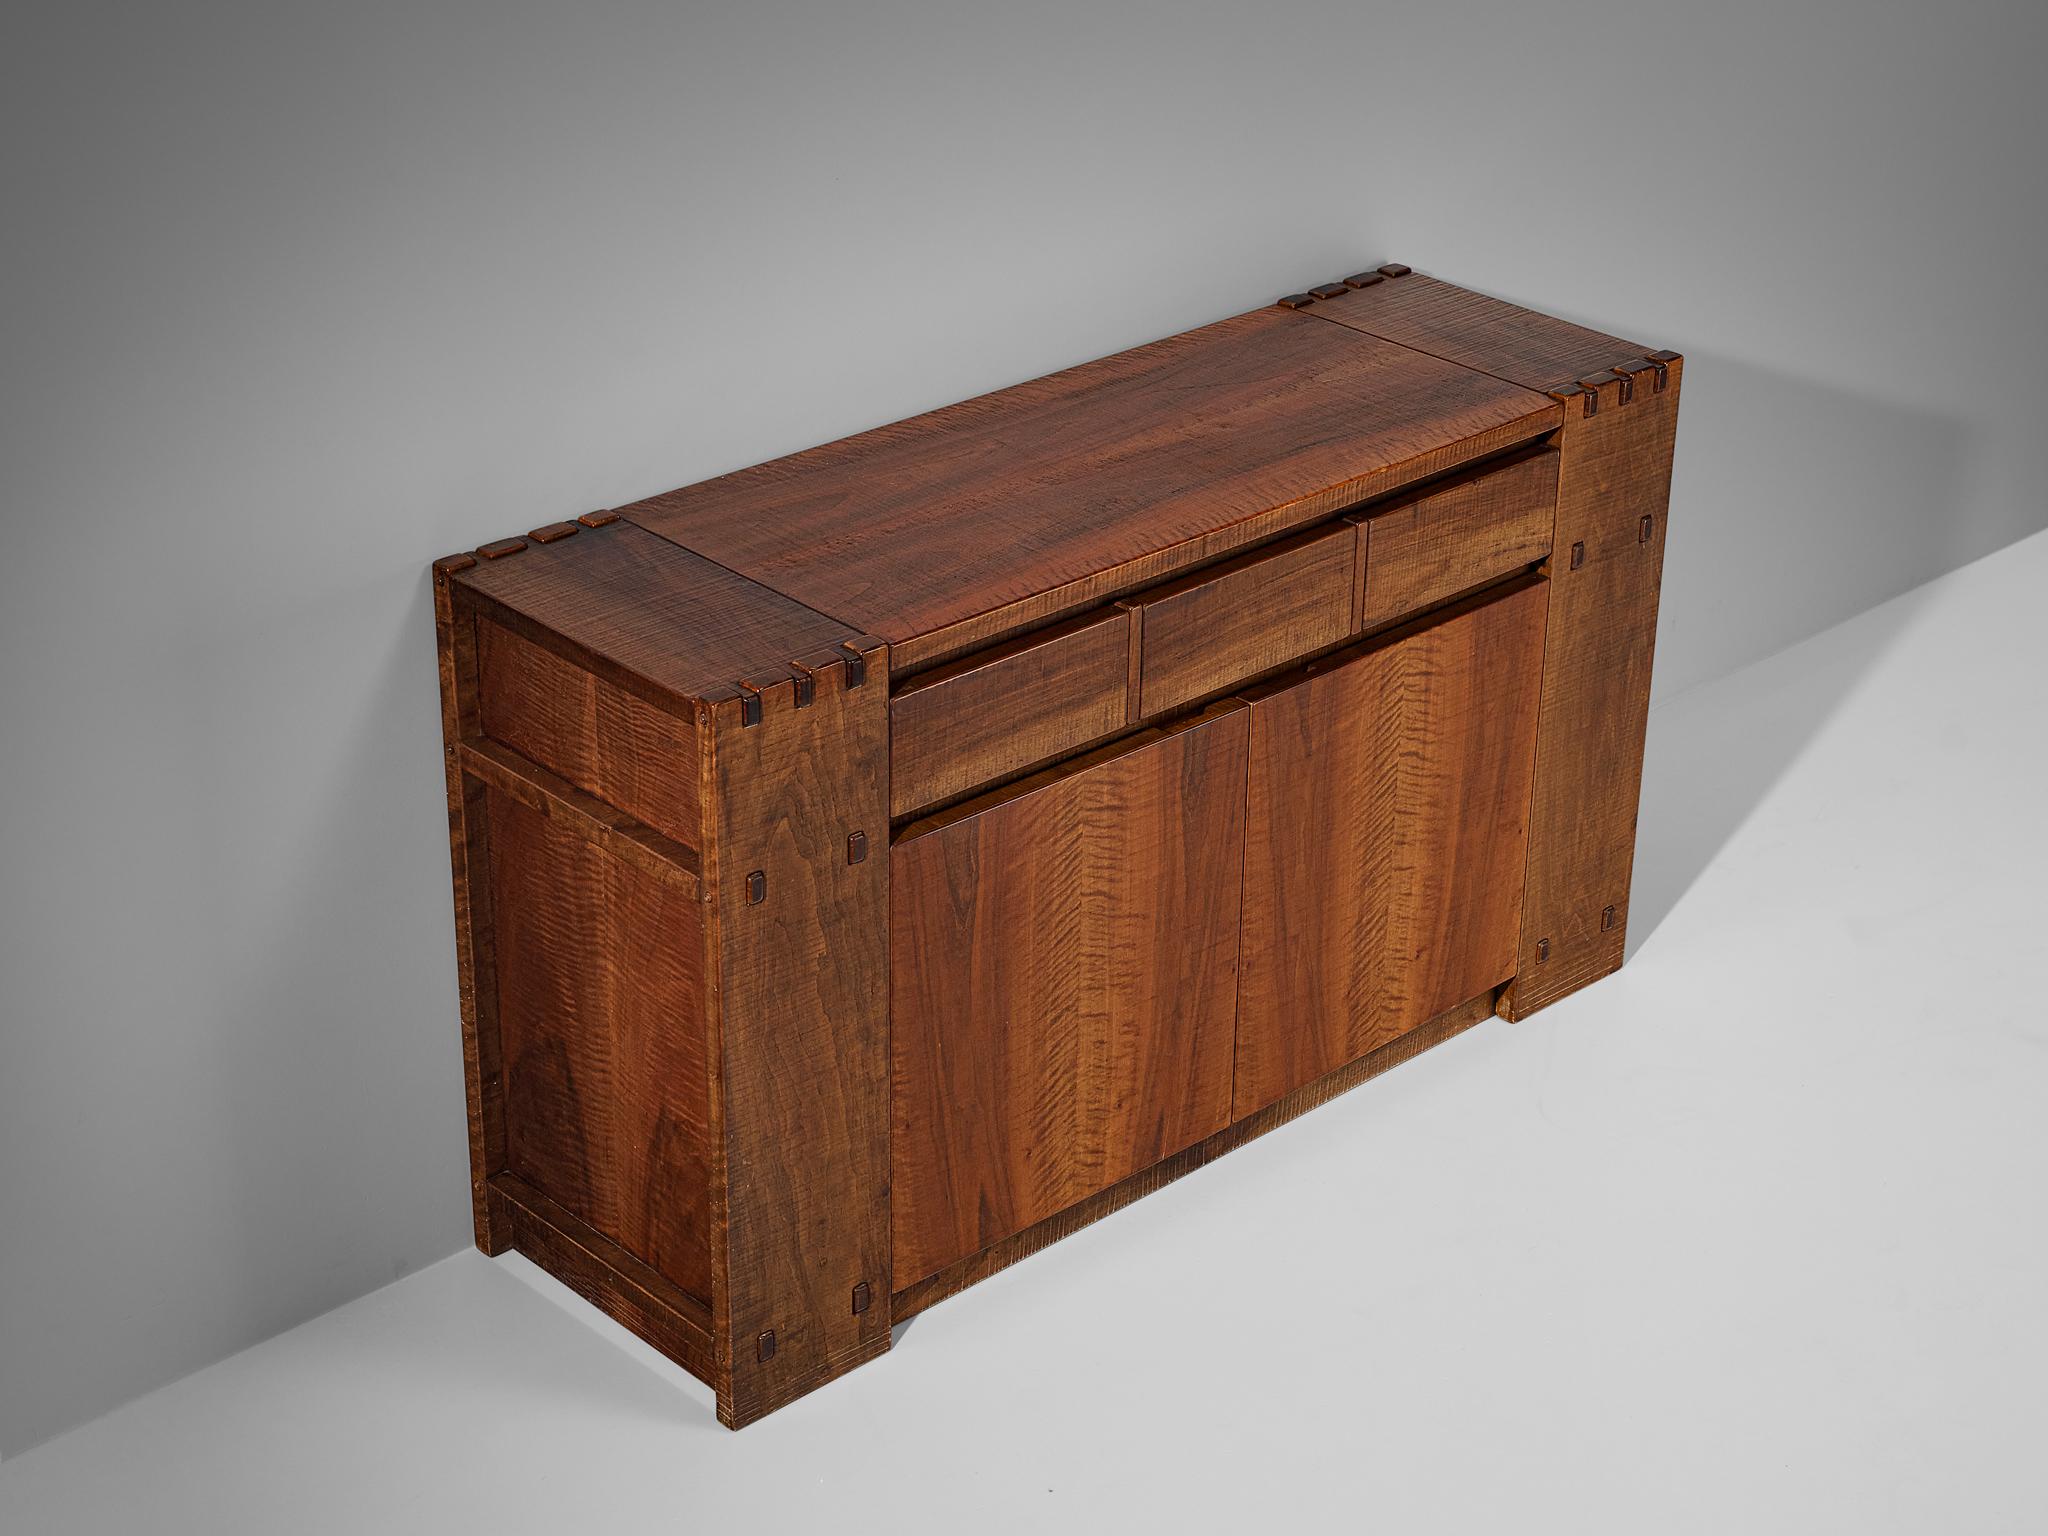 Giuseppe Rivadossi for Officina Rivadossi, sideboard, walnut, Italy, 1980s

Giuseppe Rivadossi once again proves his great eye for materialization and technicality that this design is exemplary for. The sideboard is constructed using wooden panels